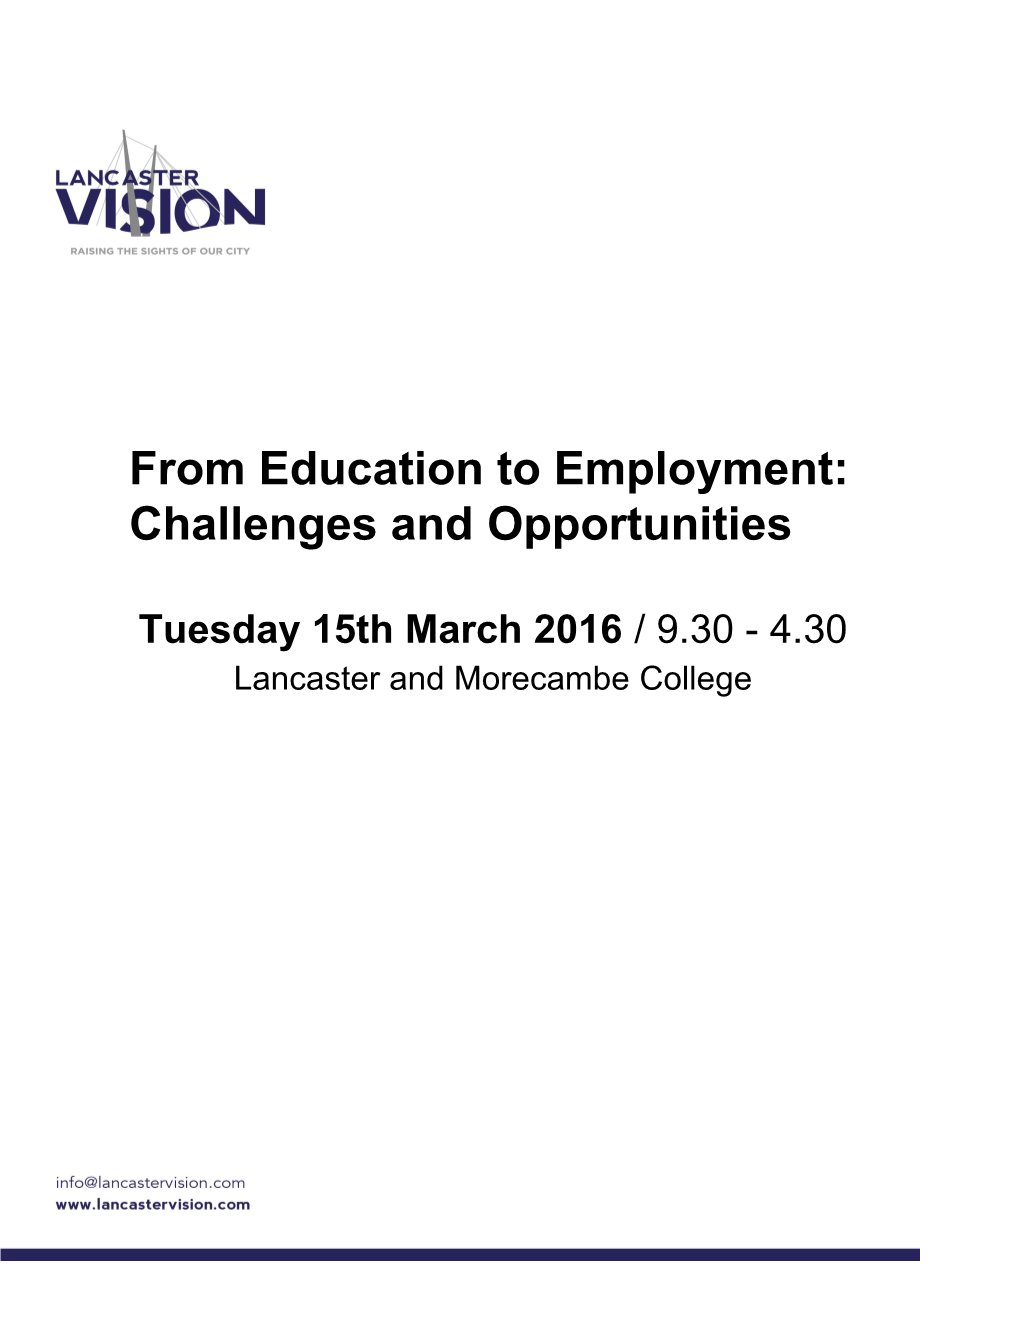 From Education to Employment: Challenges Andopportunities